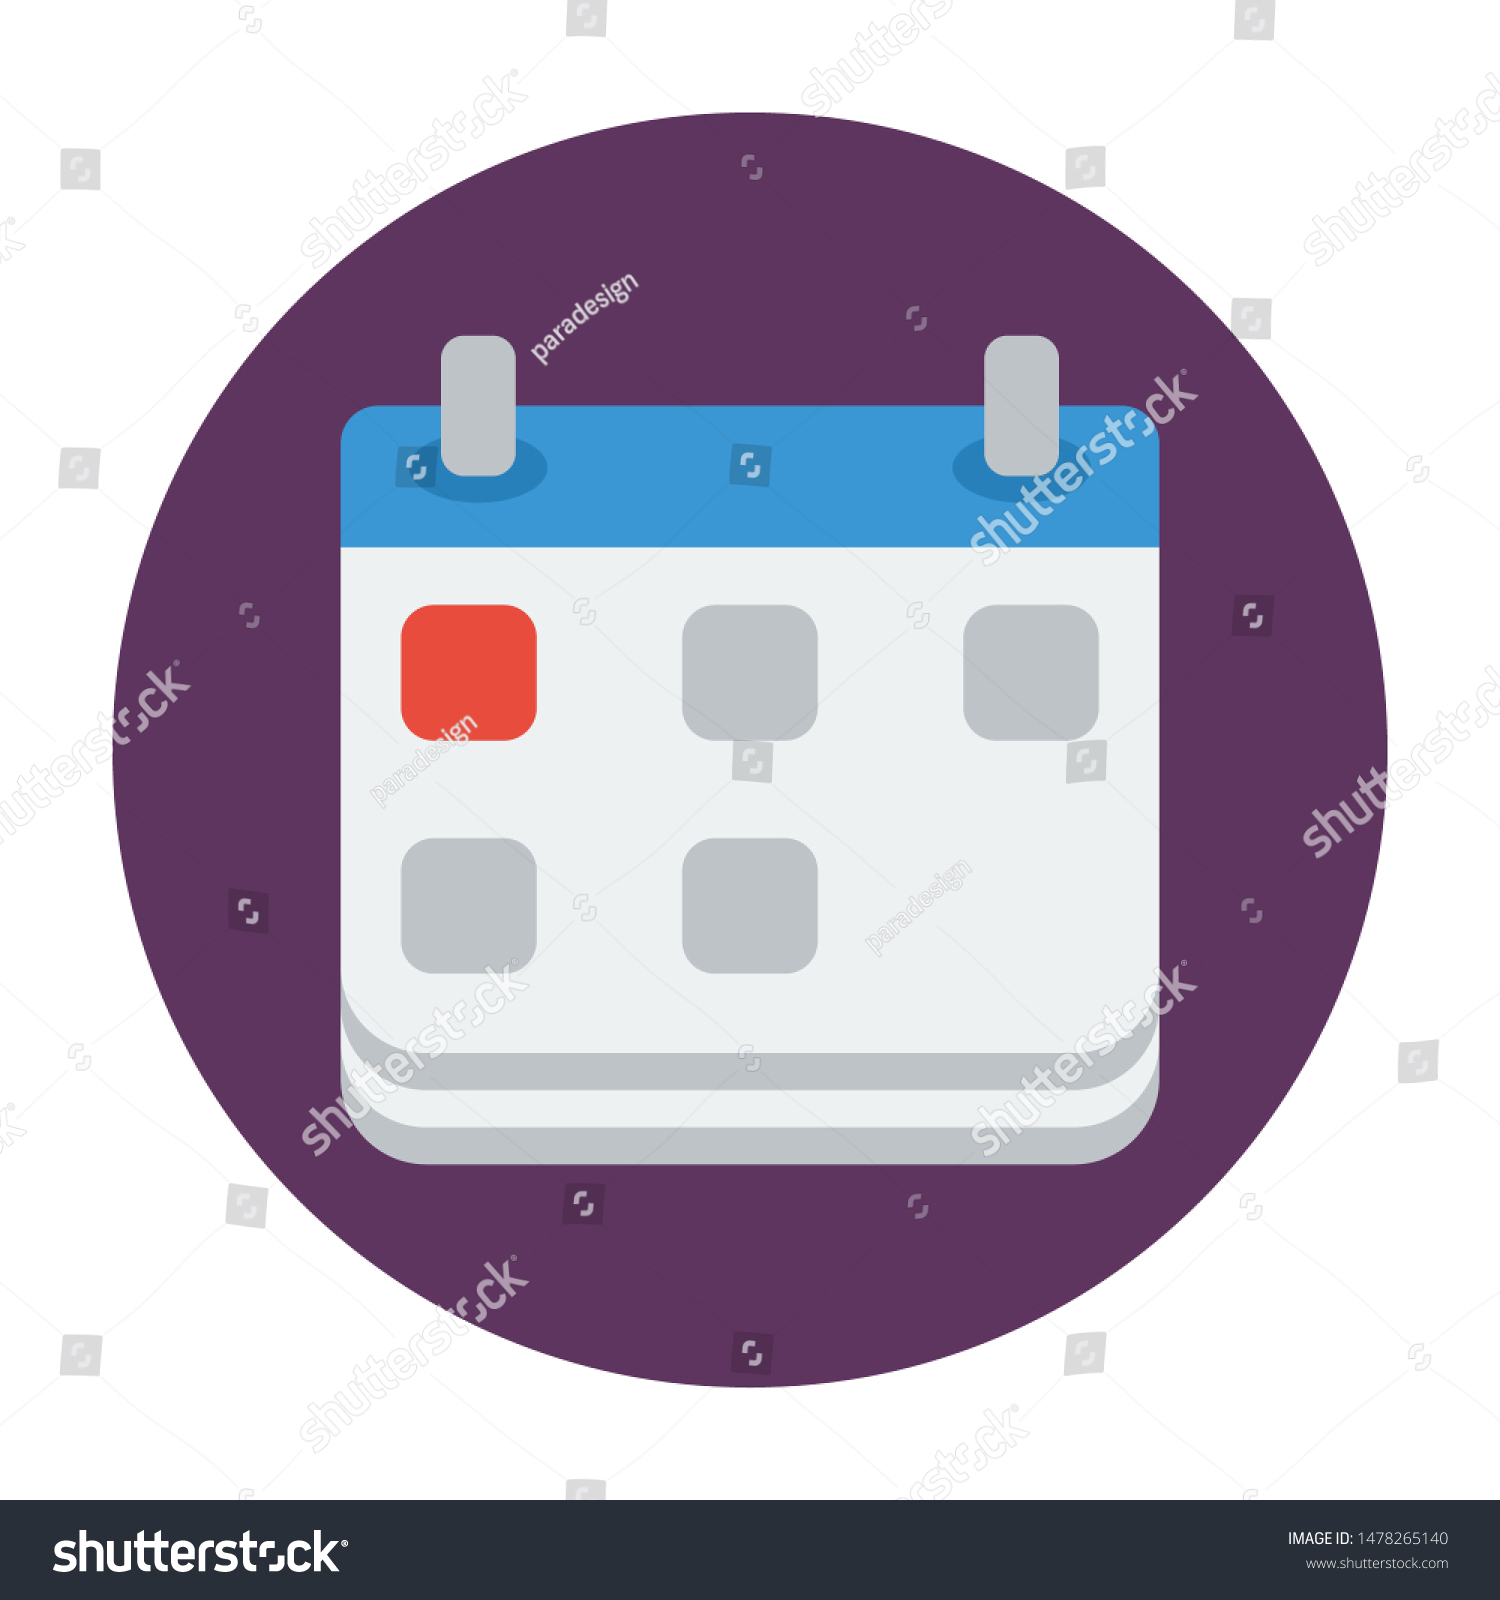 Calendar Flat Icon Can Be Used Stock Vector Royalty Free